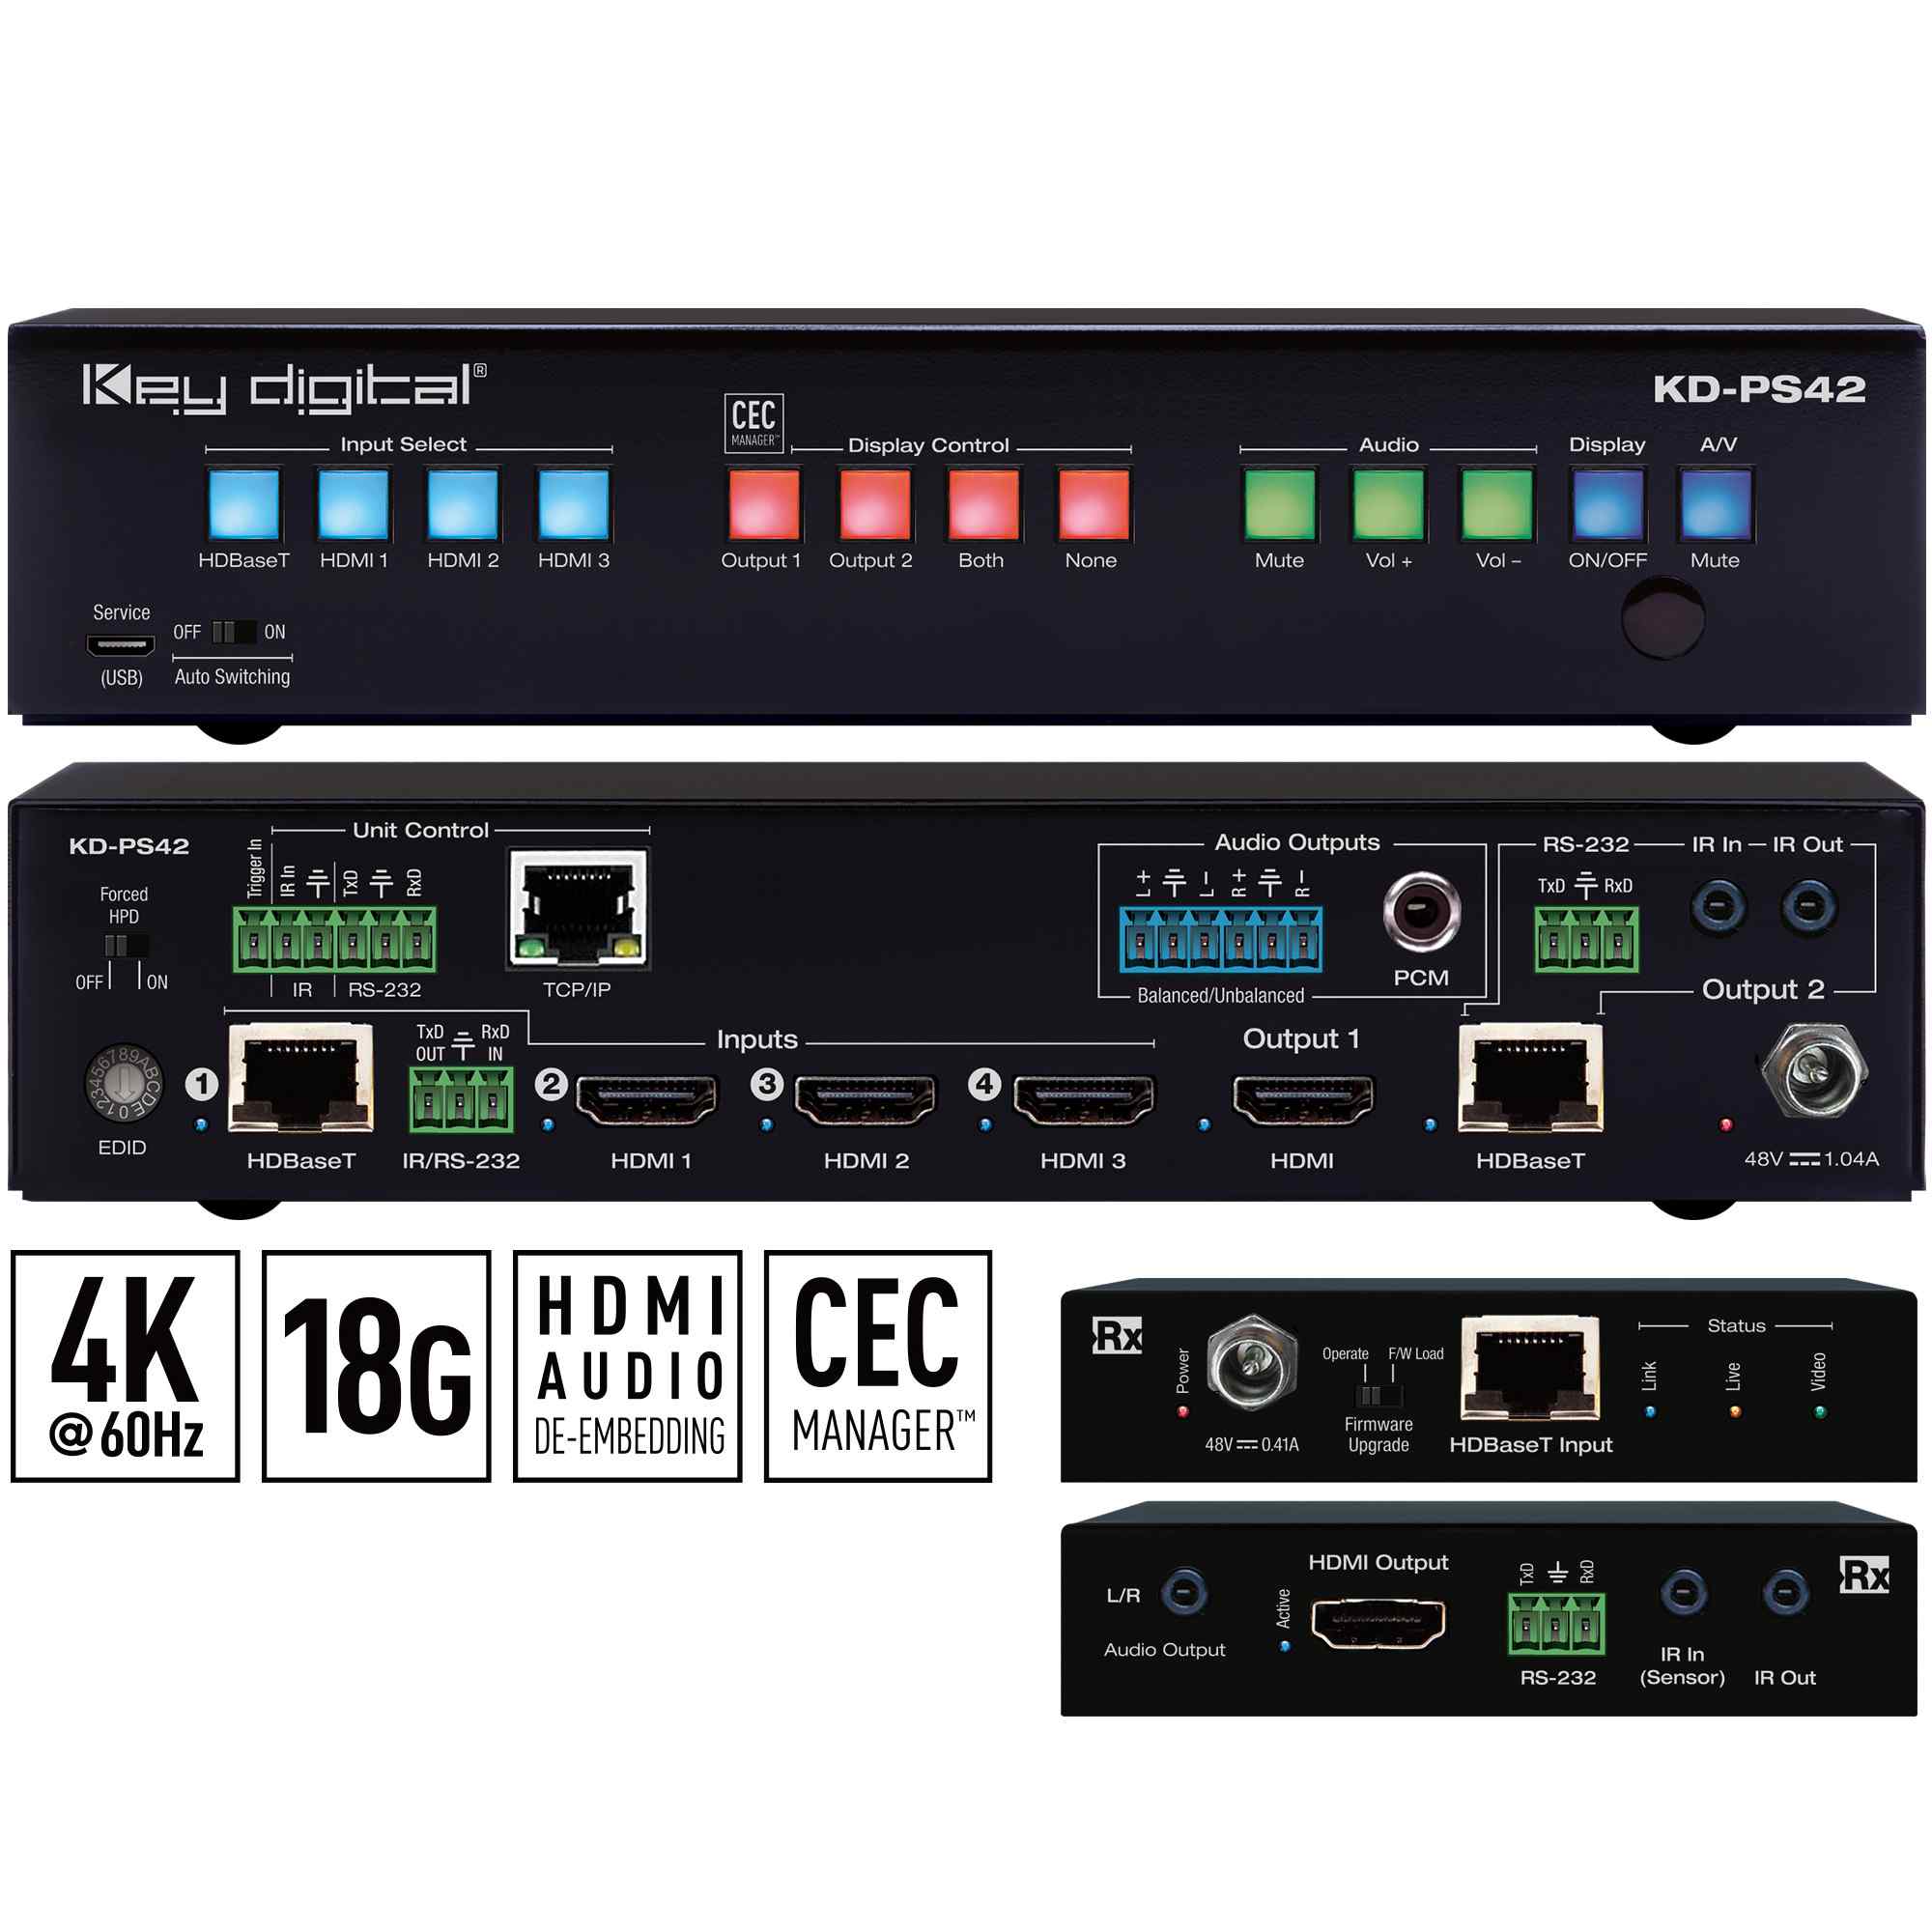 Key Digital  4K/18G Presentation Switcher with 4 Inputs (HDBaseT, 3x HDMI), 2 Mirrored Outputs (HDBaseT, HDMI), Audio De-Embed, IR, RS-232, IP, CEC Manager™. Includes Rx.  - KD-PS42